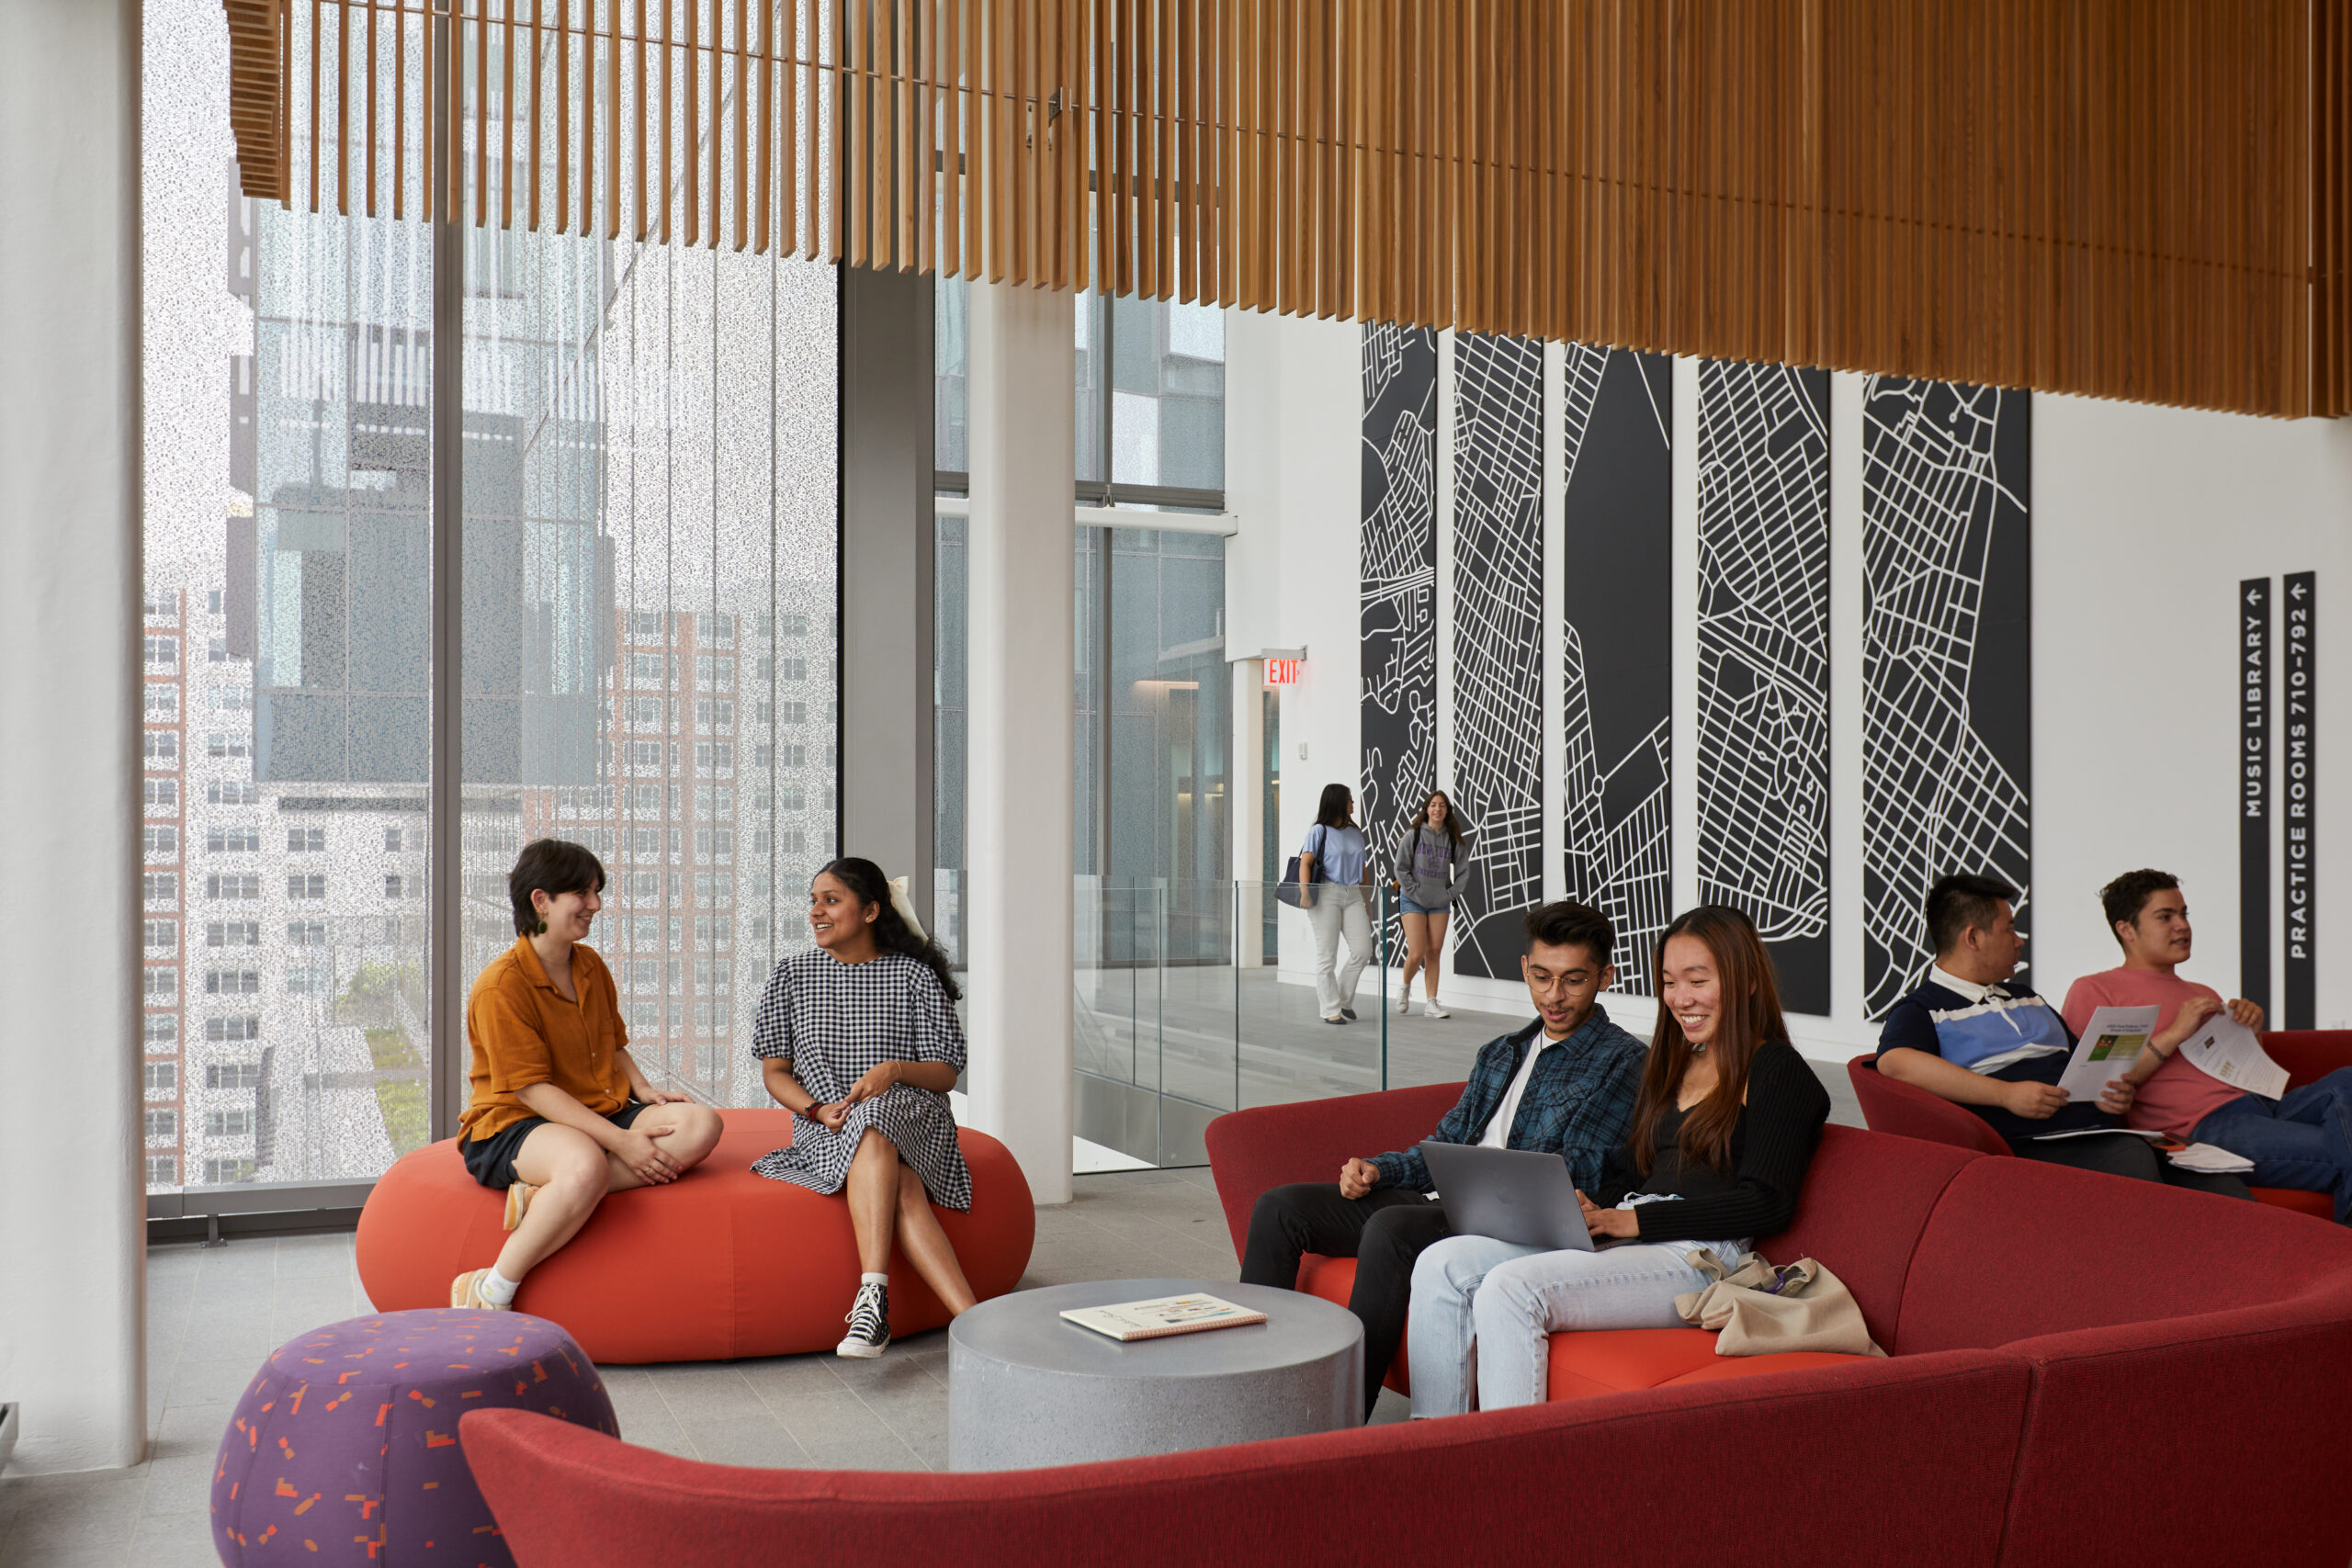 Students socializing in a lounge area within the Paulson Center on the New York City campus.